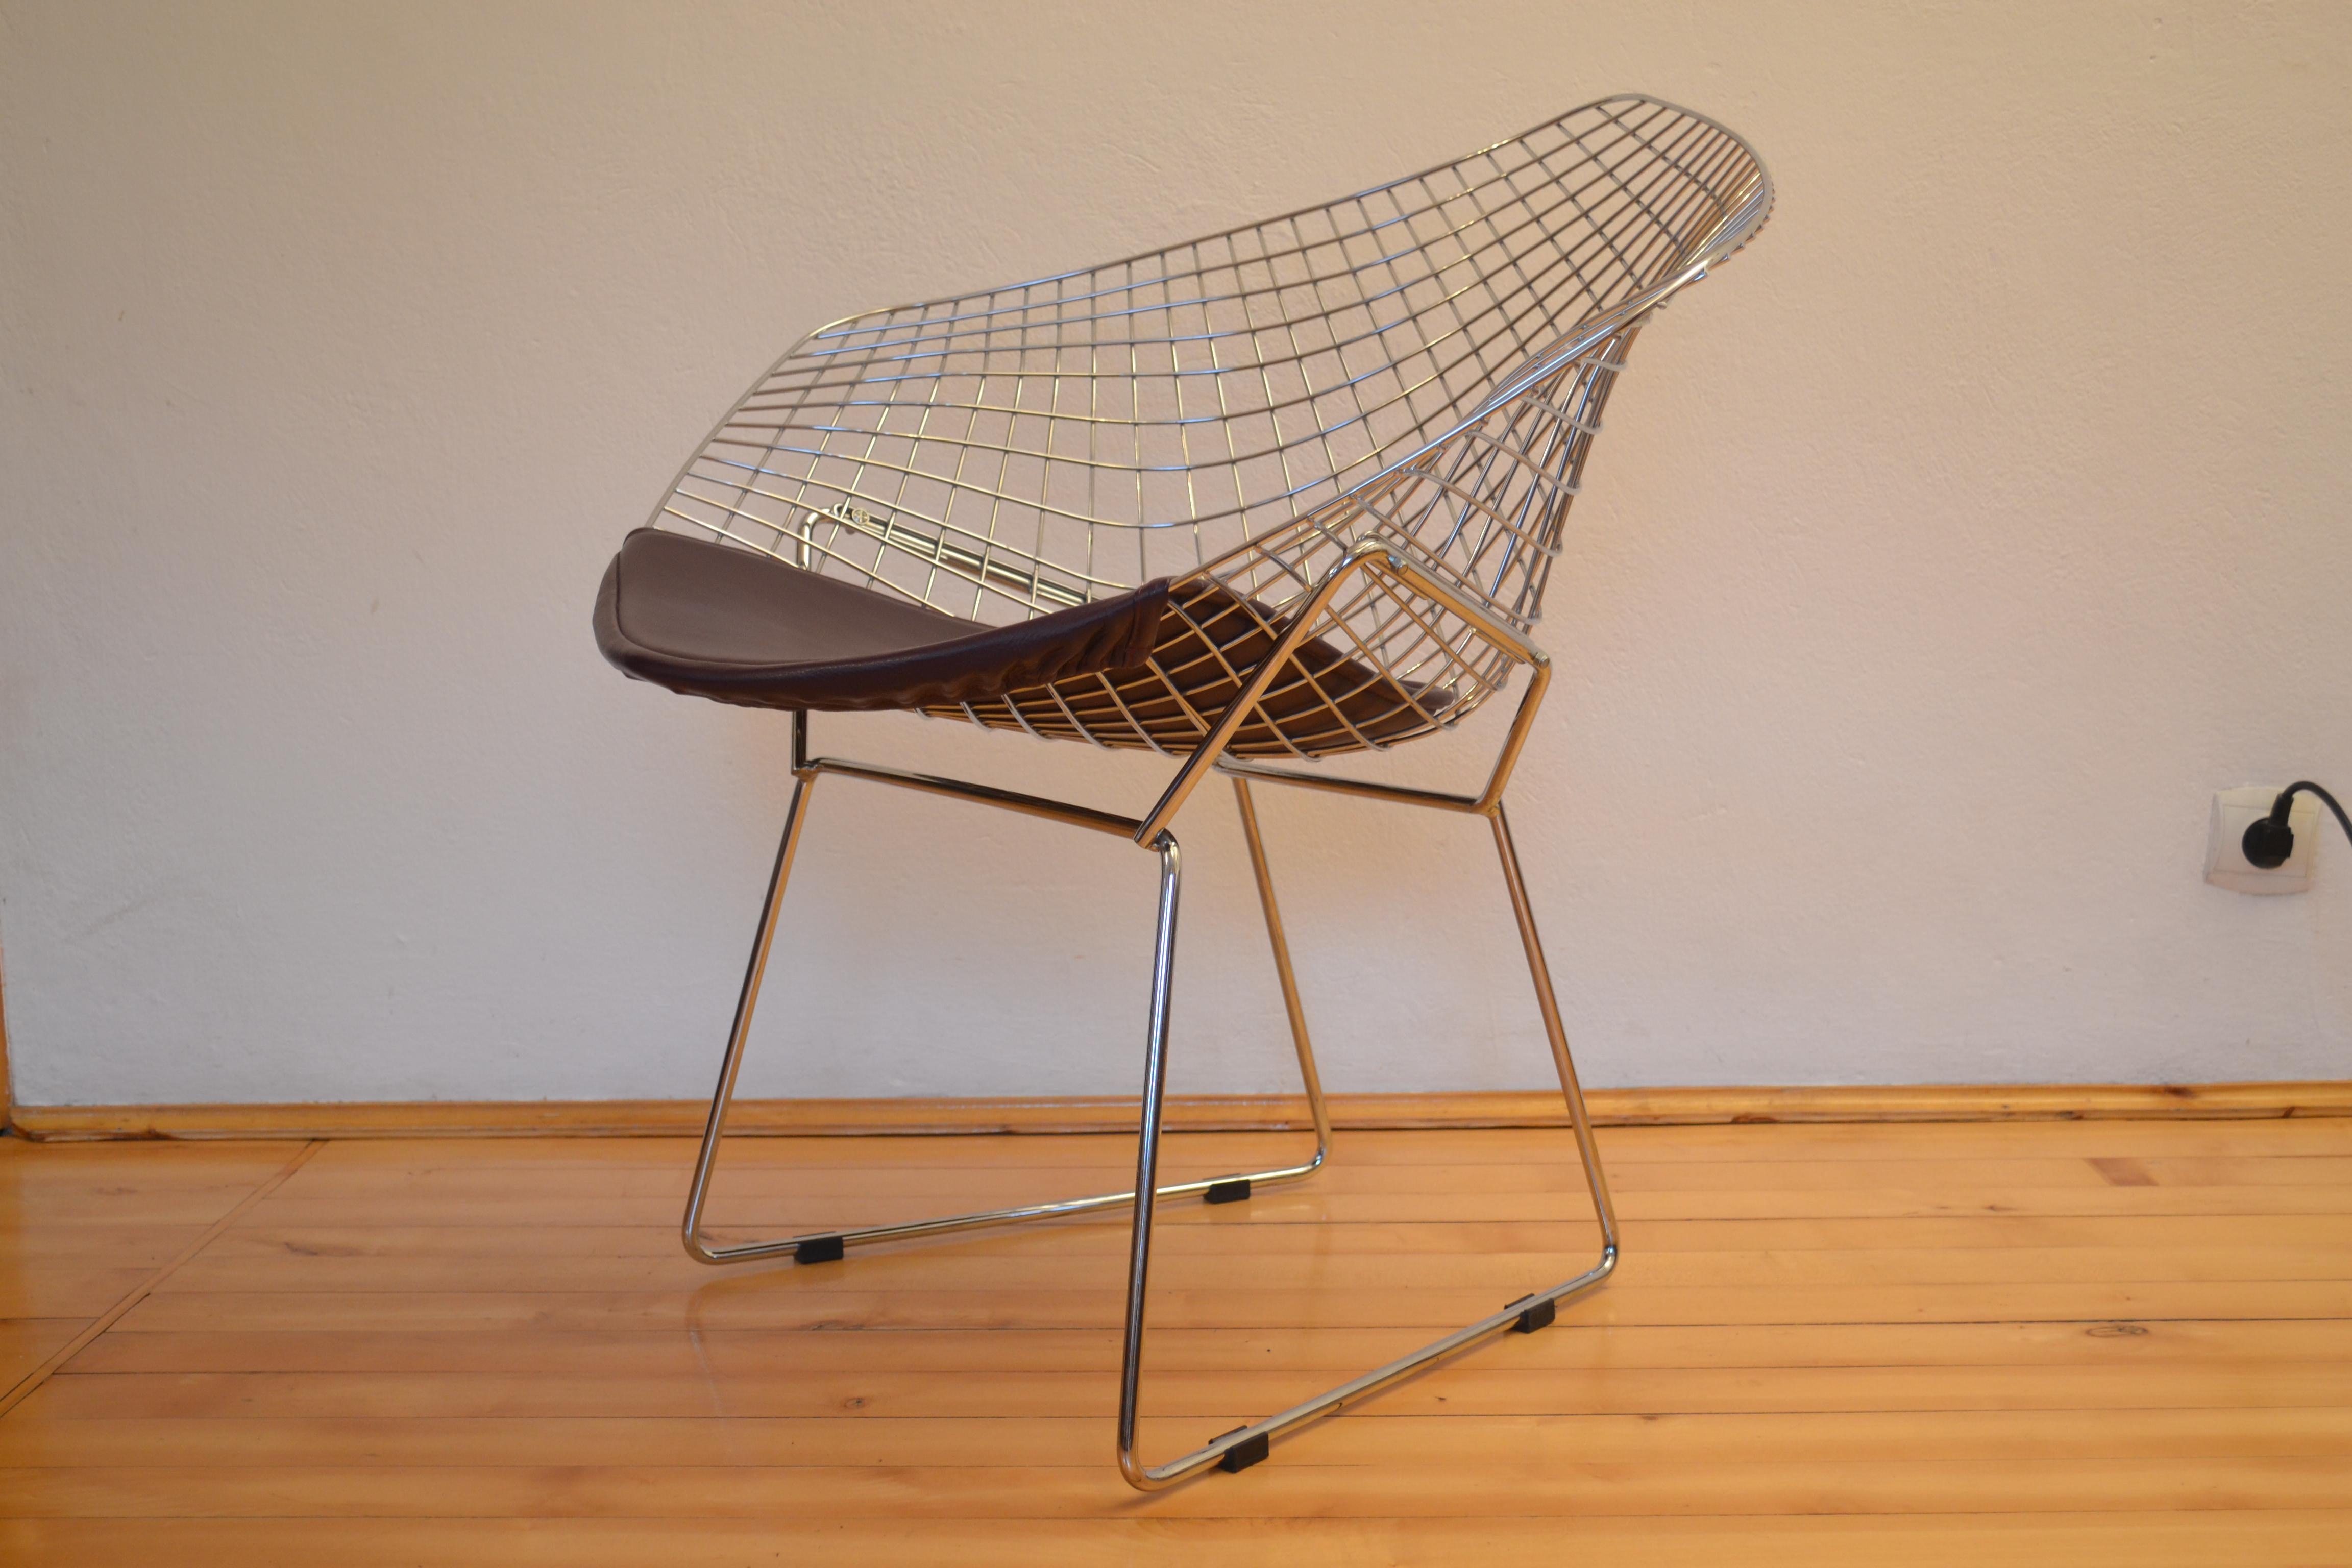 Diamond chair designed by Harry Bertoia, 1950s. Fully original. H. Bertoia's project from 52. The most expensive version with a high-class padded seat, thick natural leather. The chair practically served only as a decorative object. Perfect